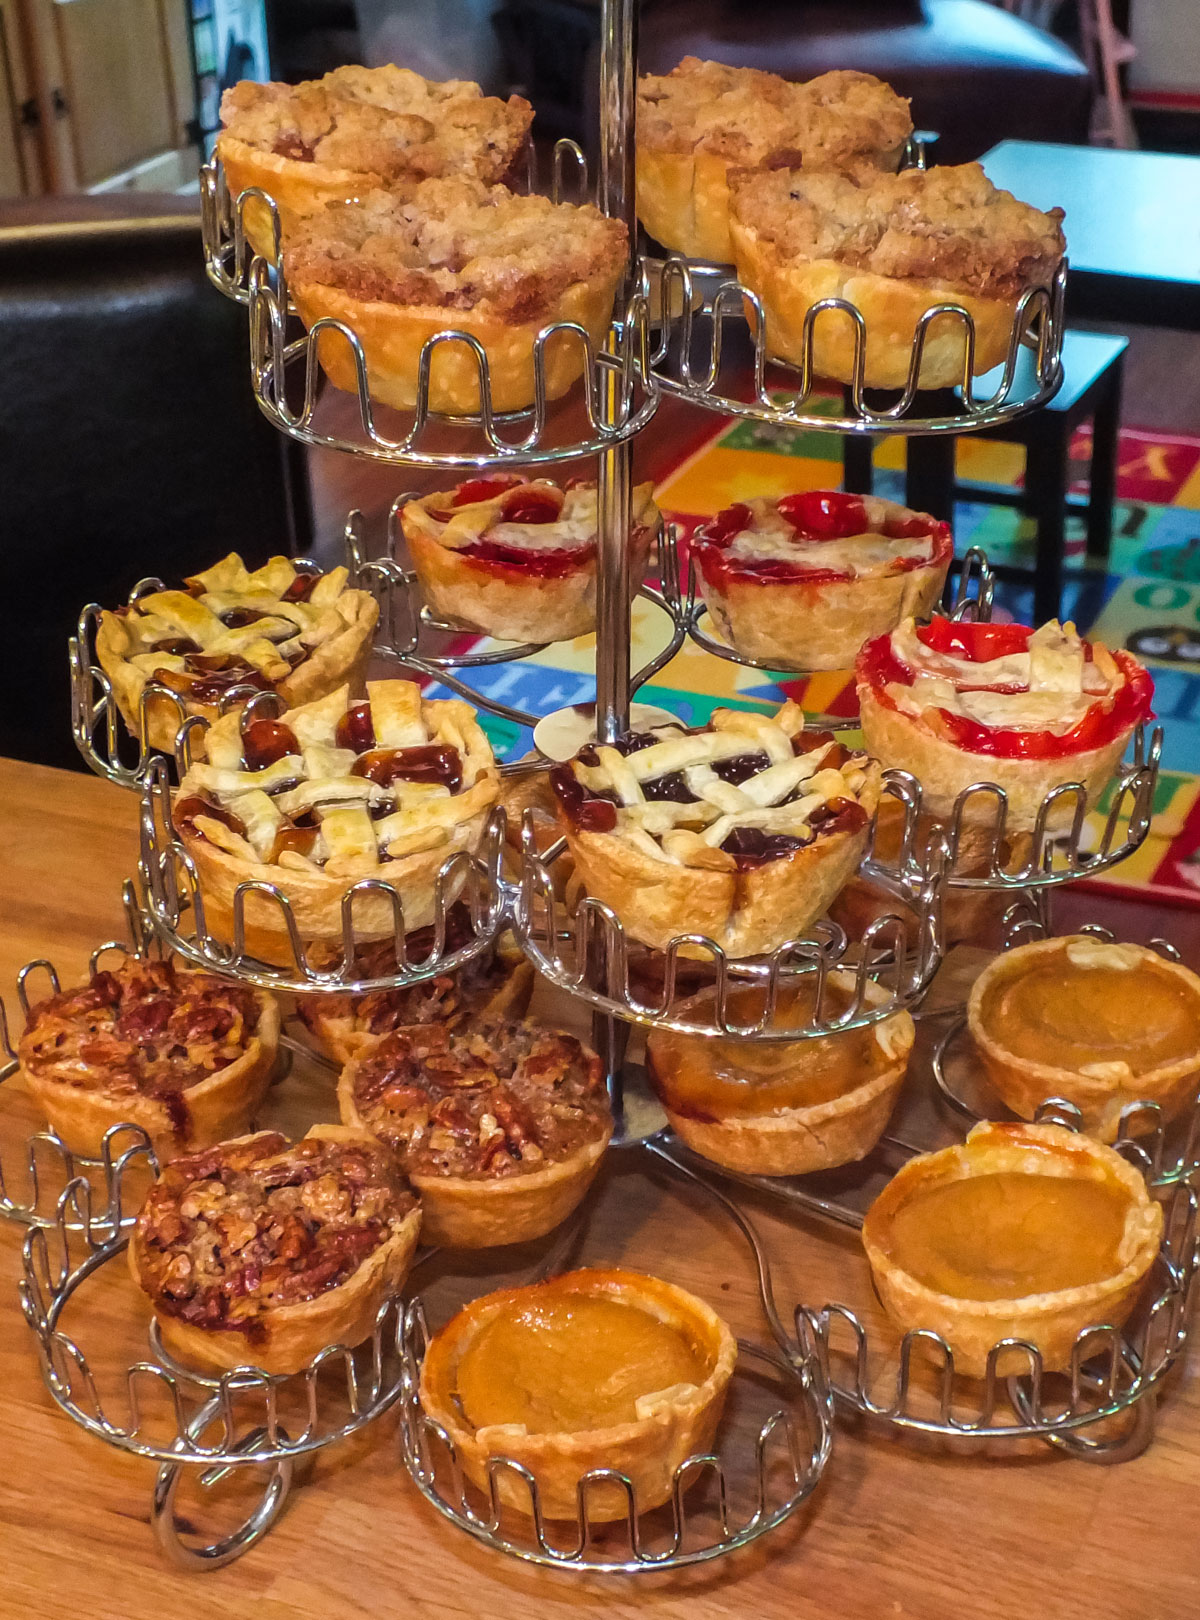 Closeup on a Cupcake Stand filled with Mini Pies for the Holidays of various flavors including Mince, Cherry, Pecan, Pumpkin and Apple.